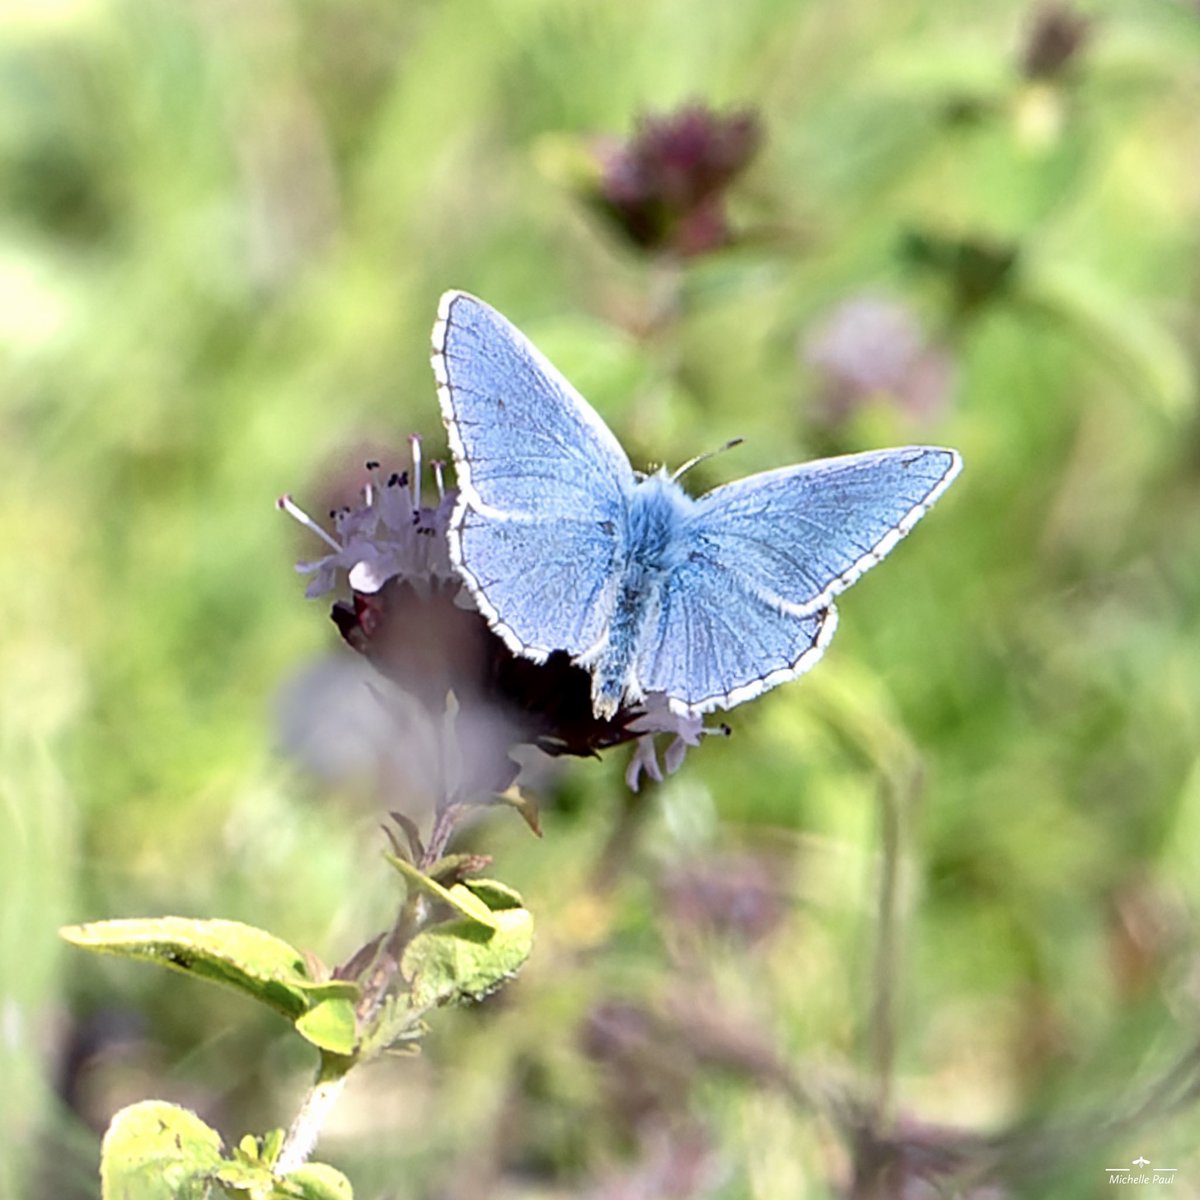 Good afternoon! Another blue butterfly for you today, an Adonis Blue 🦋🩵

#TwitterNatureCommunity #TwitterNaturePhotography #nikonphotography #nature #Butterflies #insects #Polyommatus #Lepidoptera #Lycaenidae #blue #simplicity